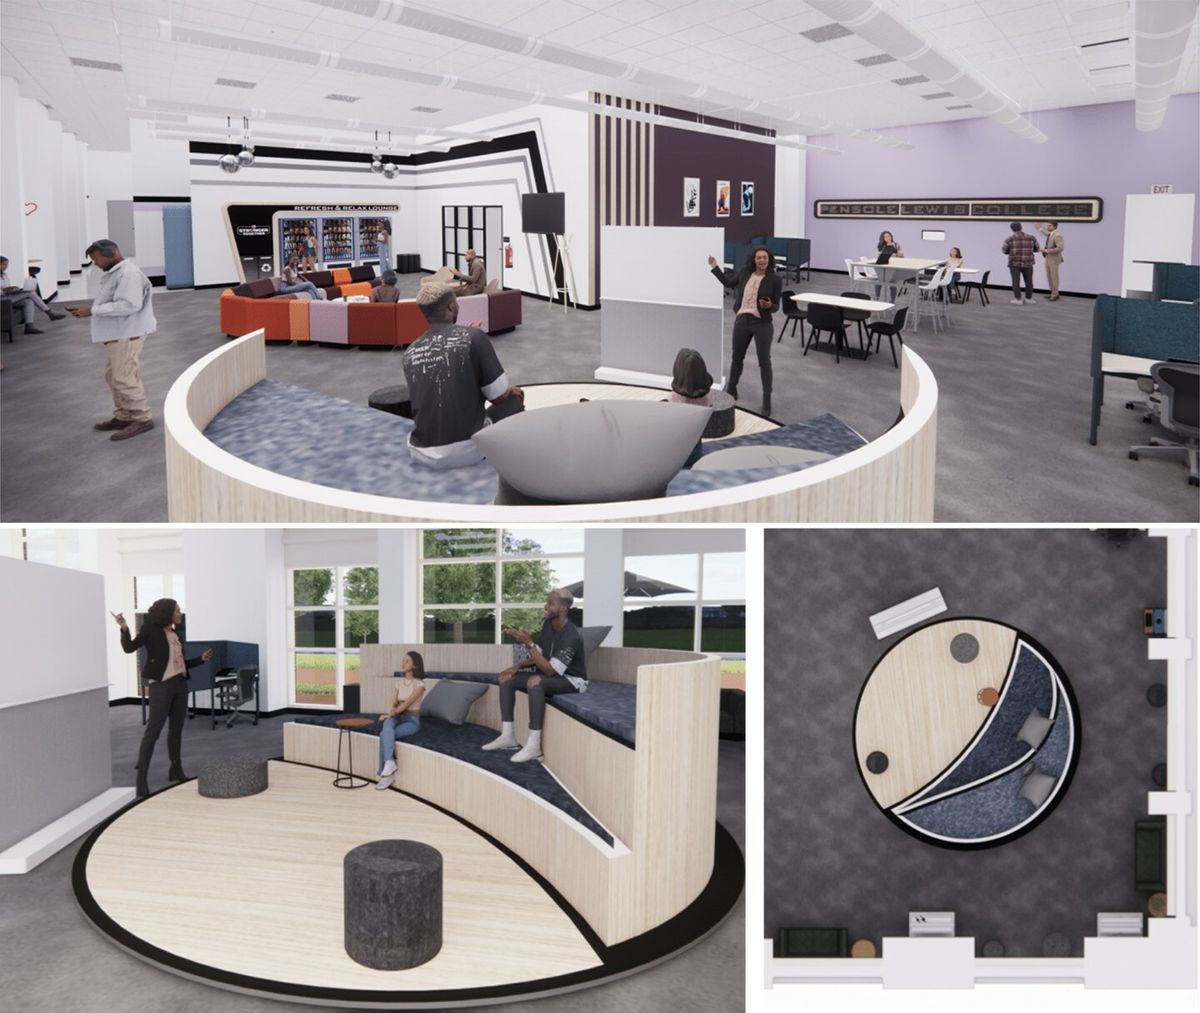 Pensole Lewis College students designing new student lounge in partnership with Pepsi, MillerKnoll